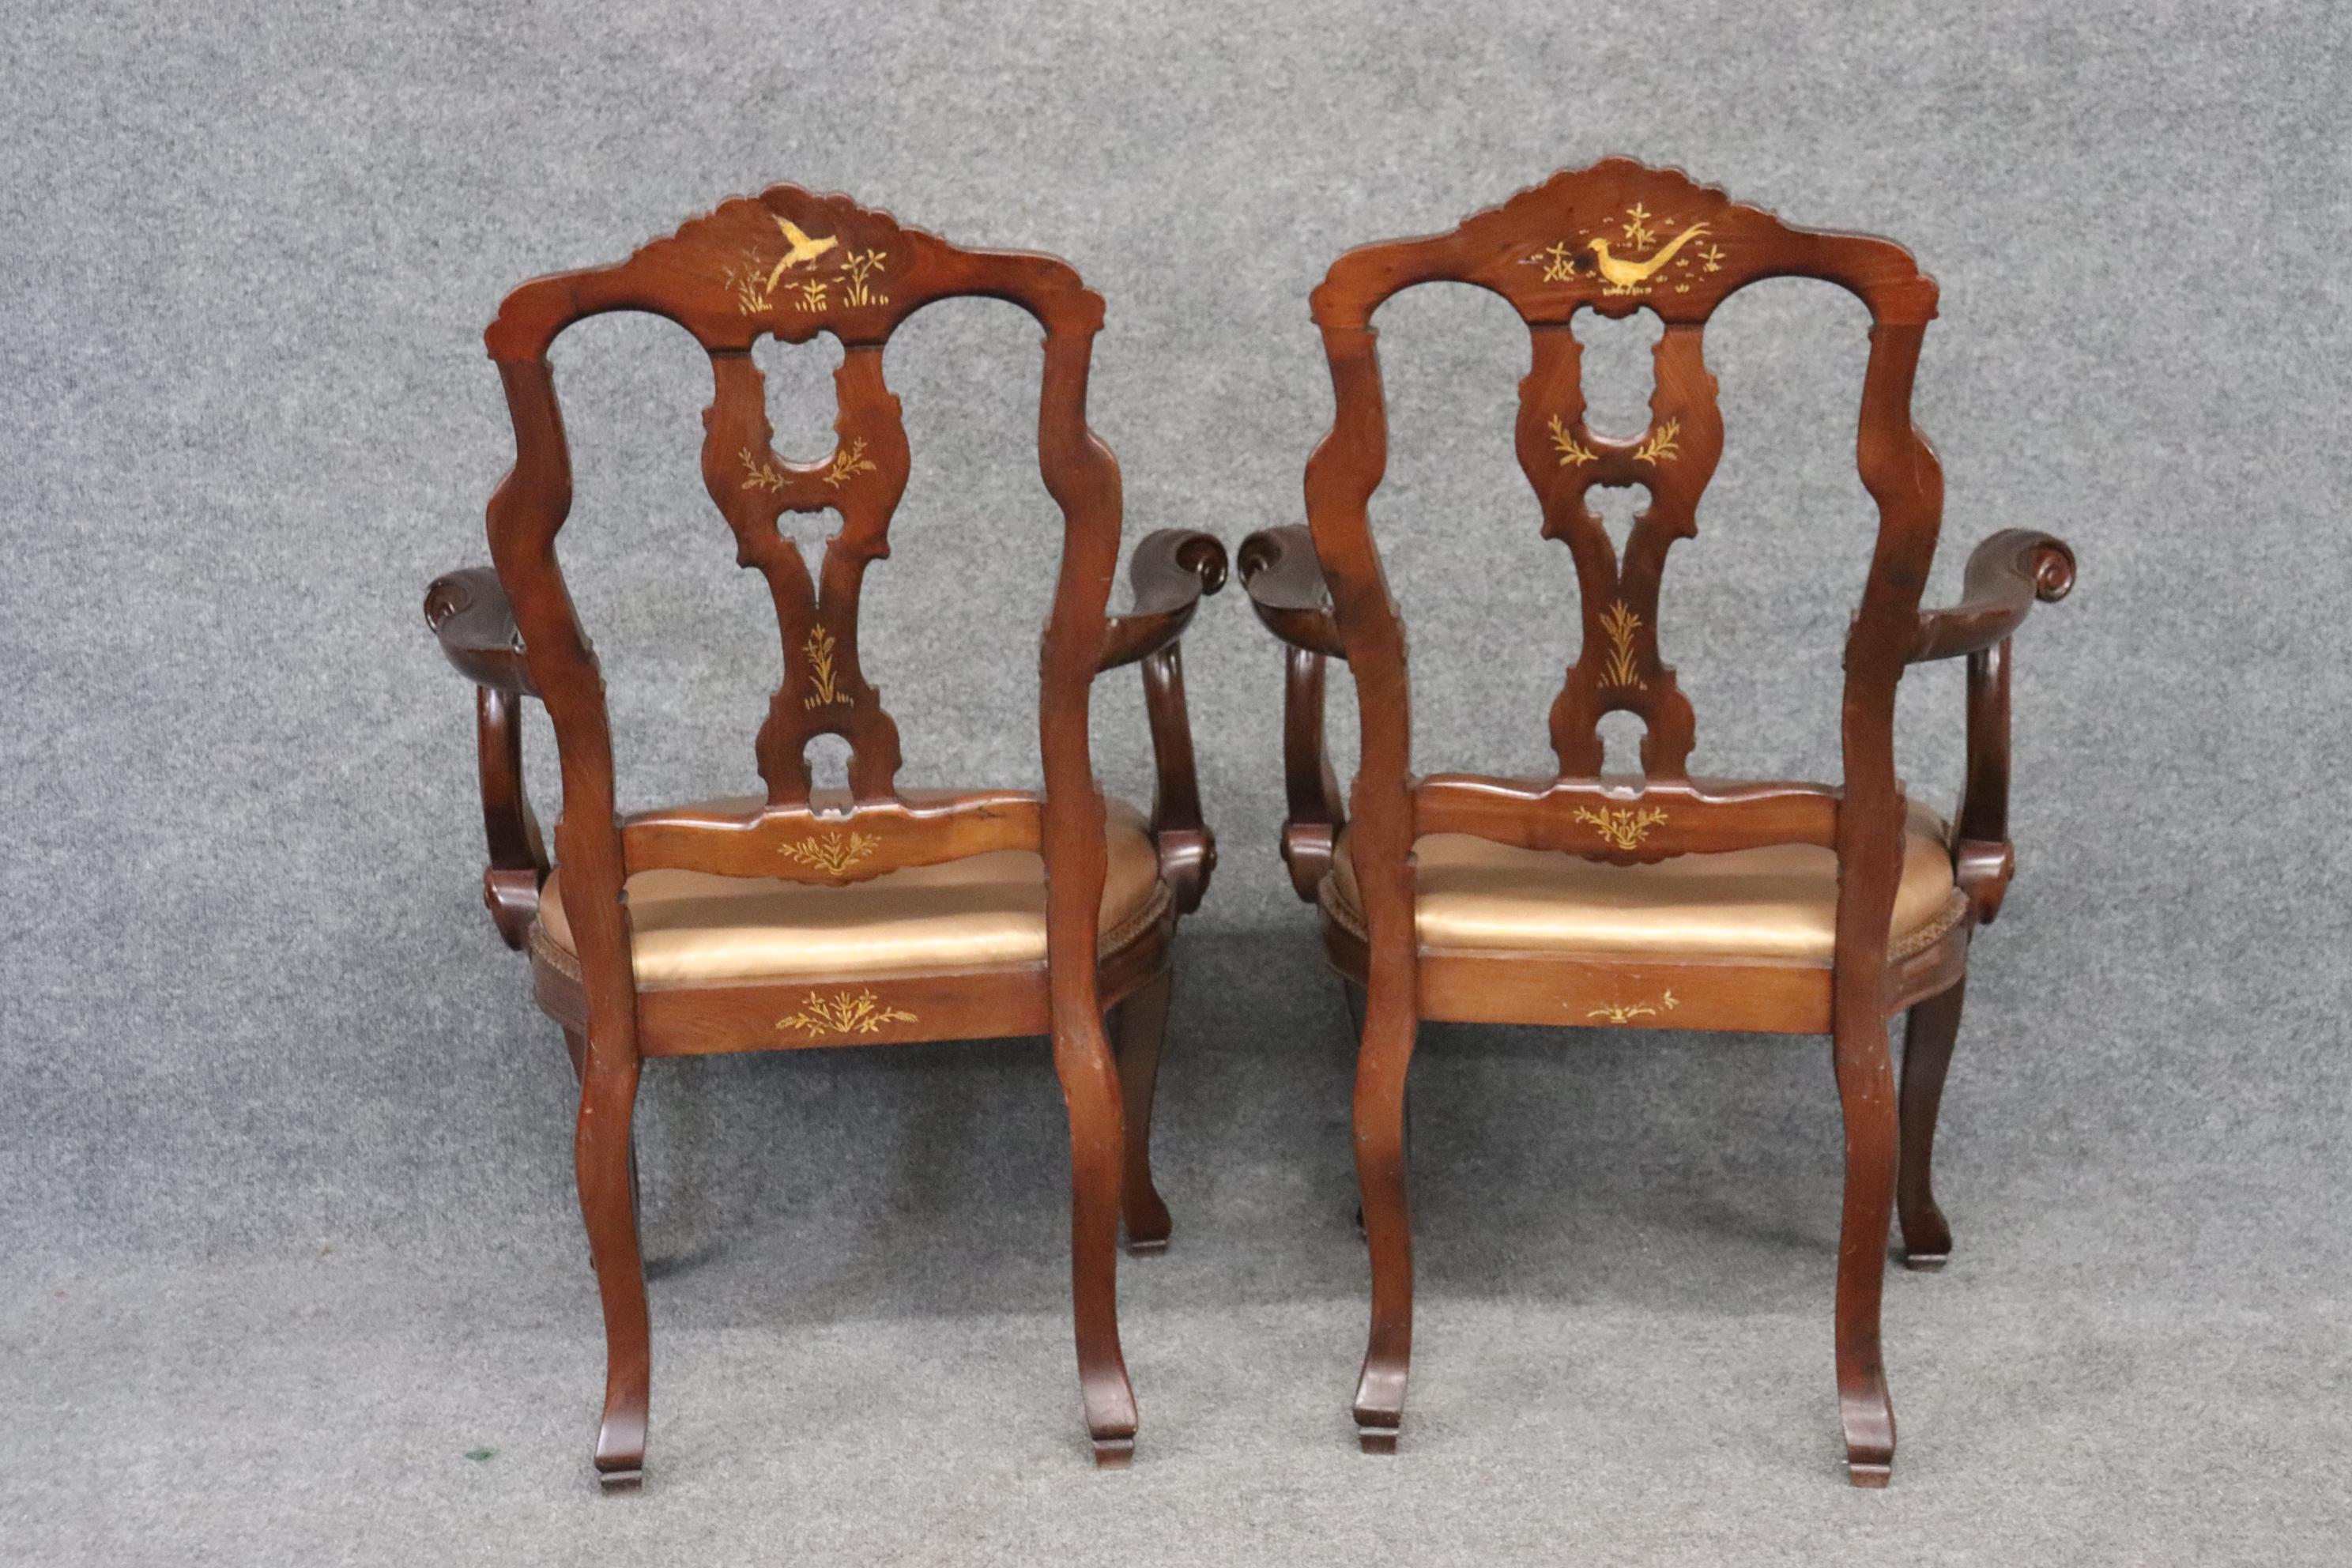 Rococo Revival Set of 10 Chinoiserie Italian Rococo Style Bronze Leather Seats Dining Chairs 